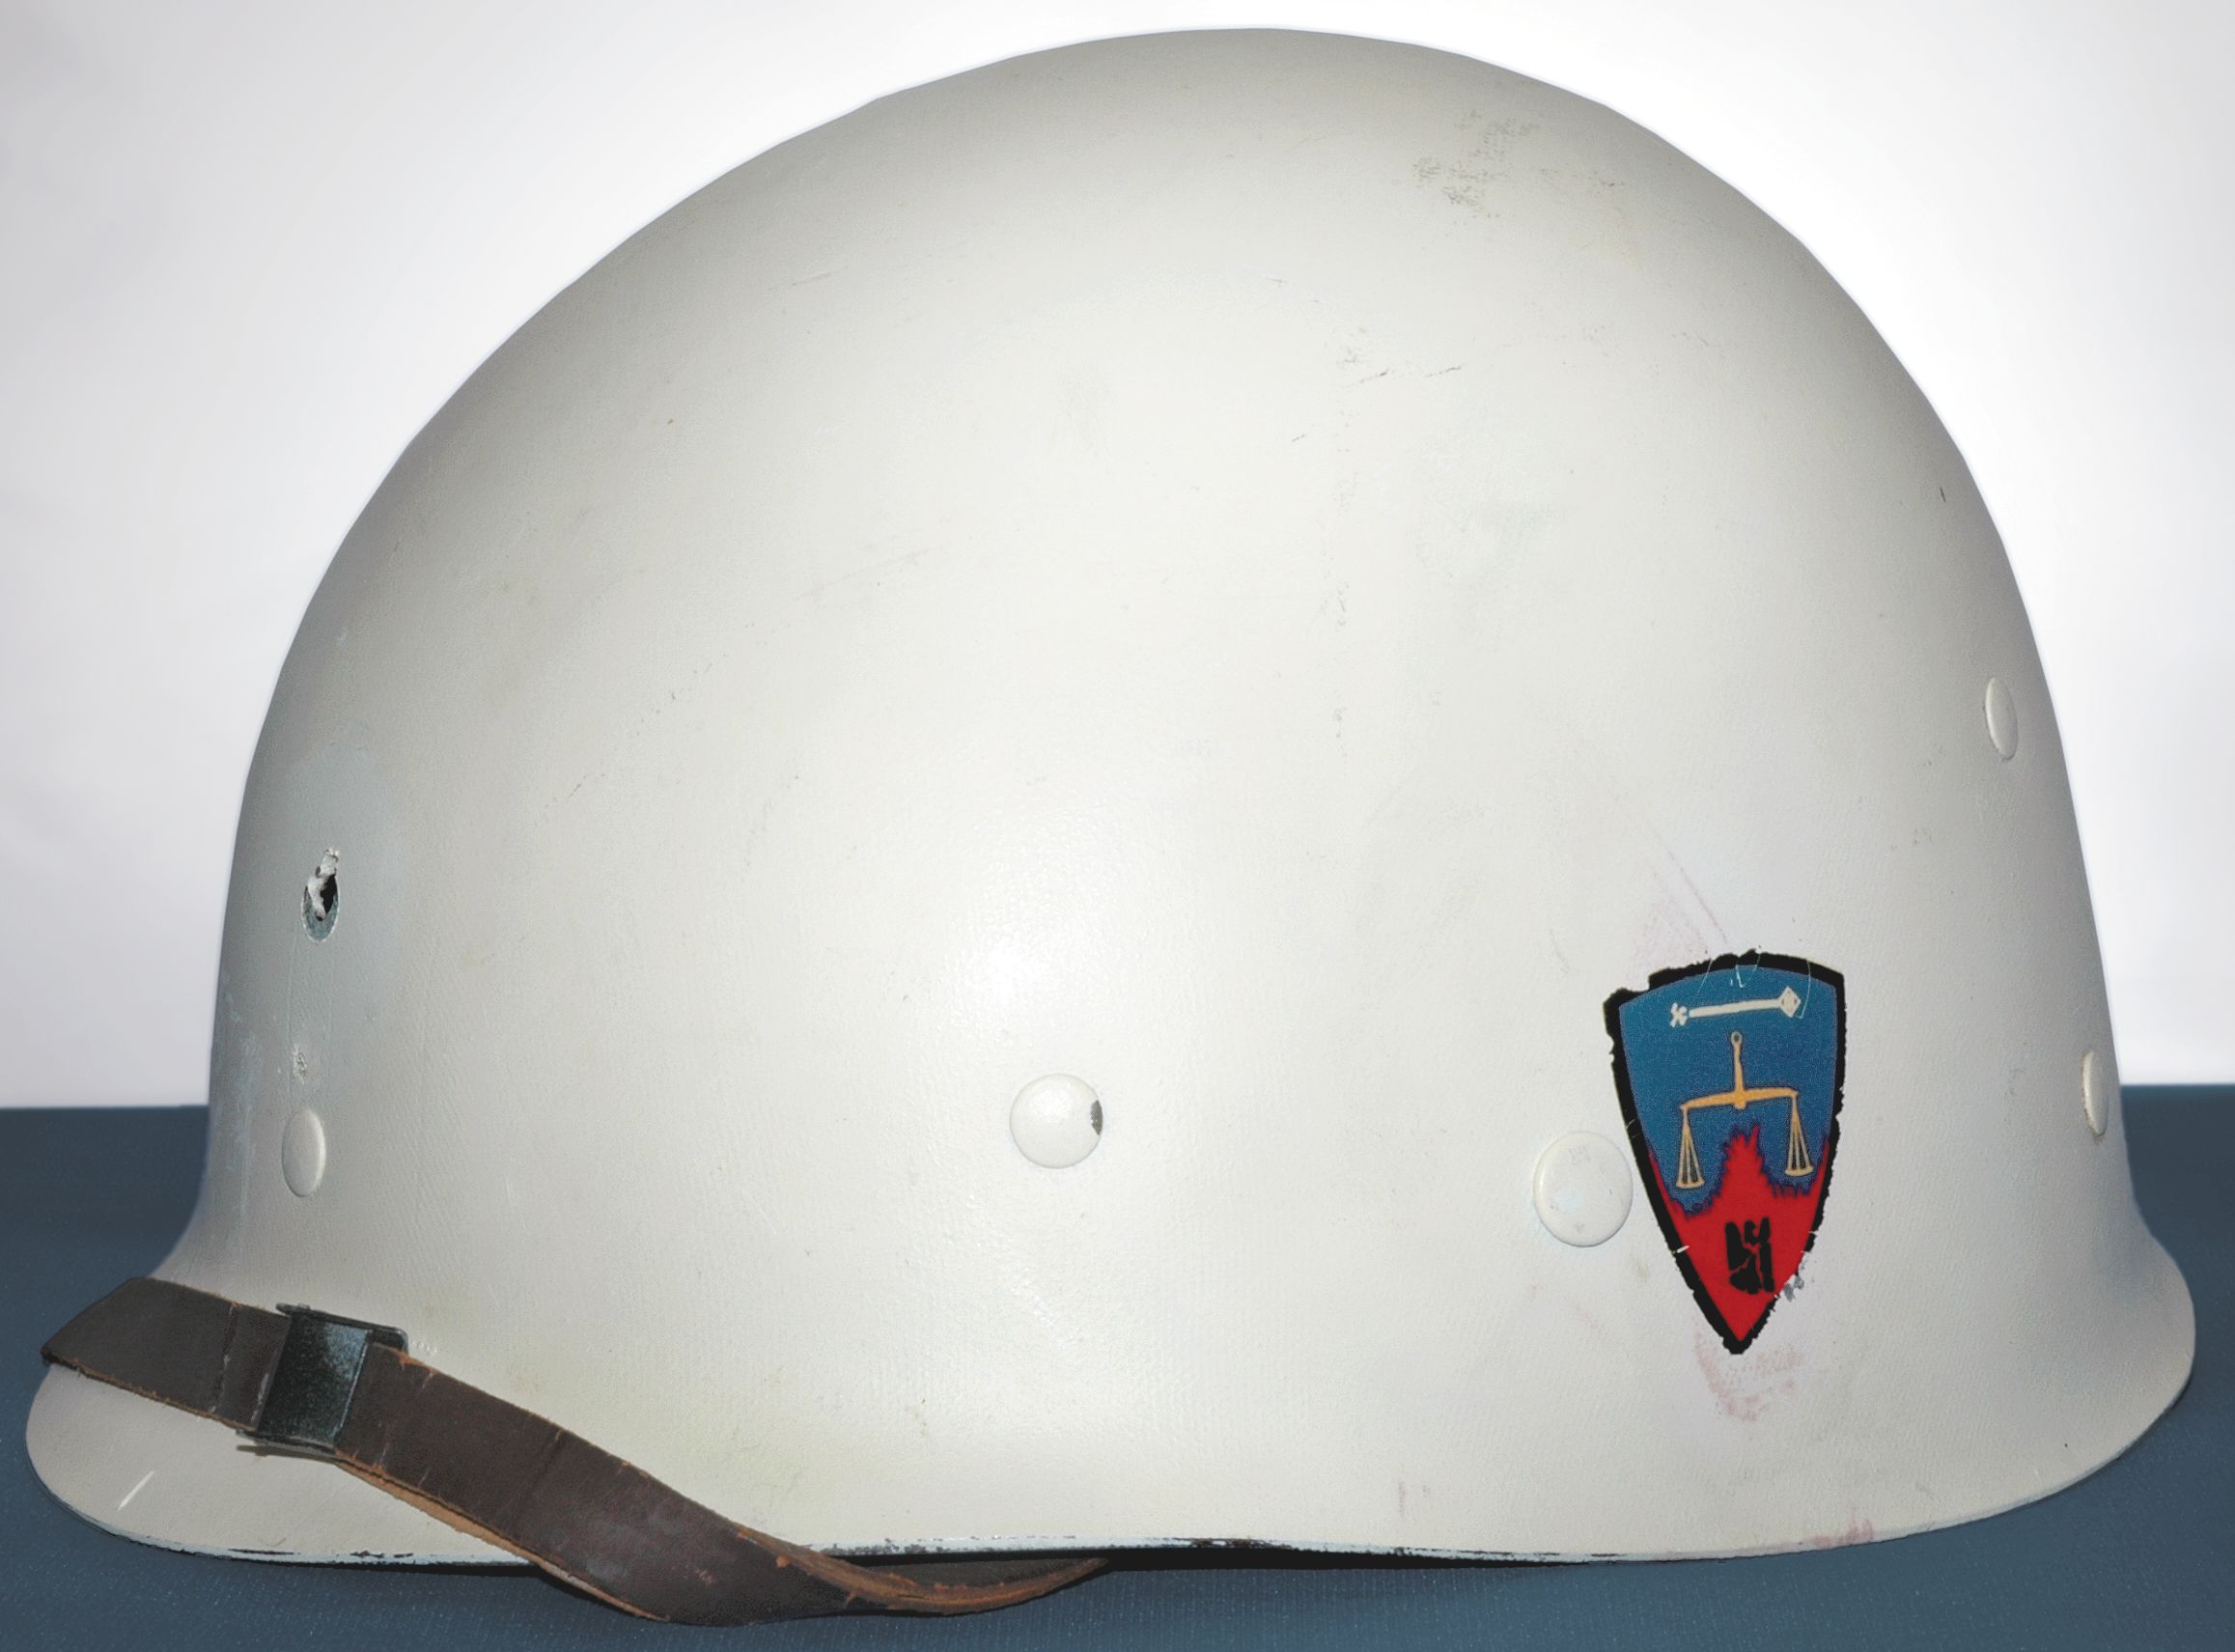 The insignia on the helmet decal was widely recognized as the official symbol of the military police. 